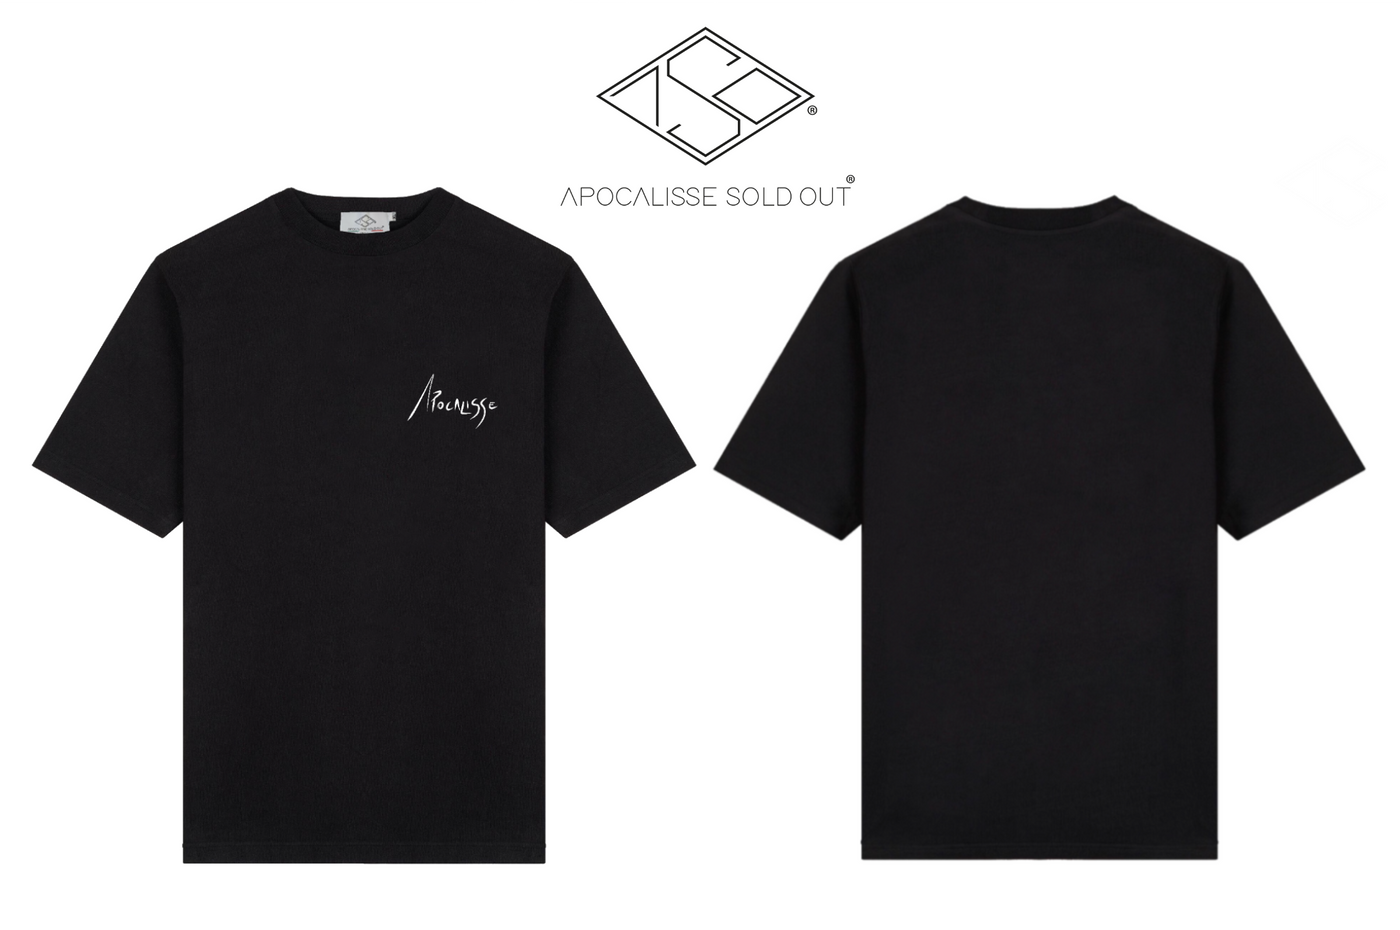 tshirt Apocalisse SIMPLE basic edition by ApocalisseSoldOut® Fashion Brand